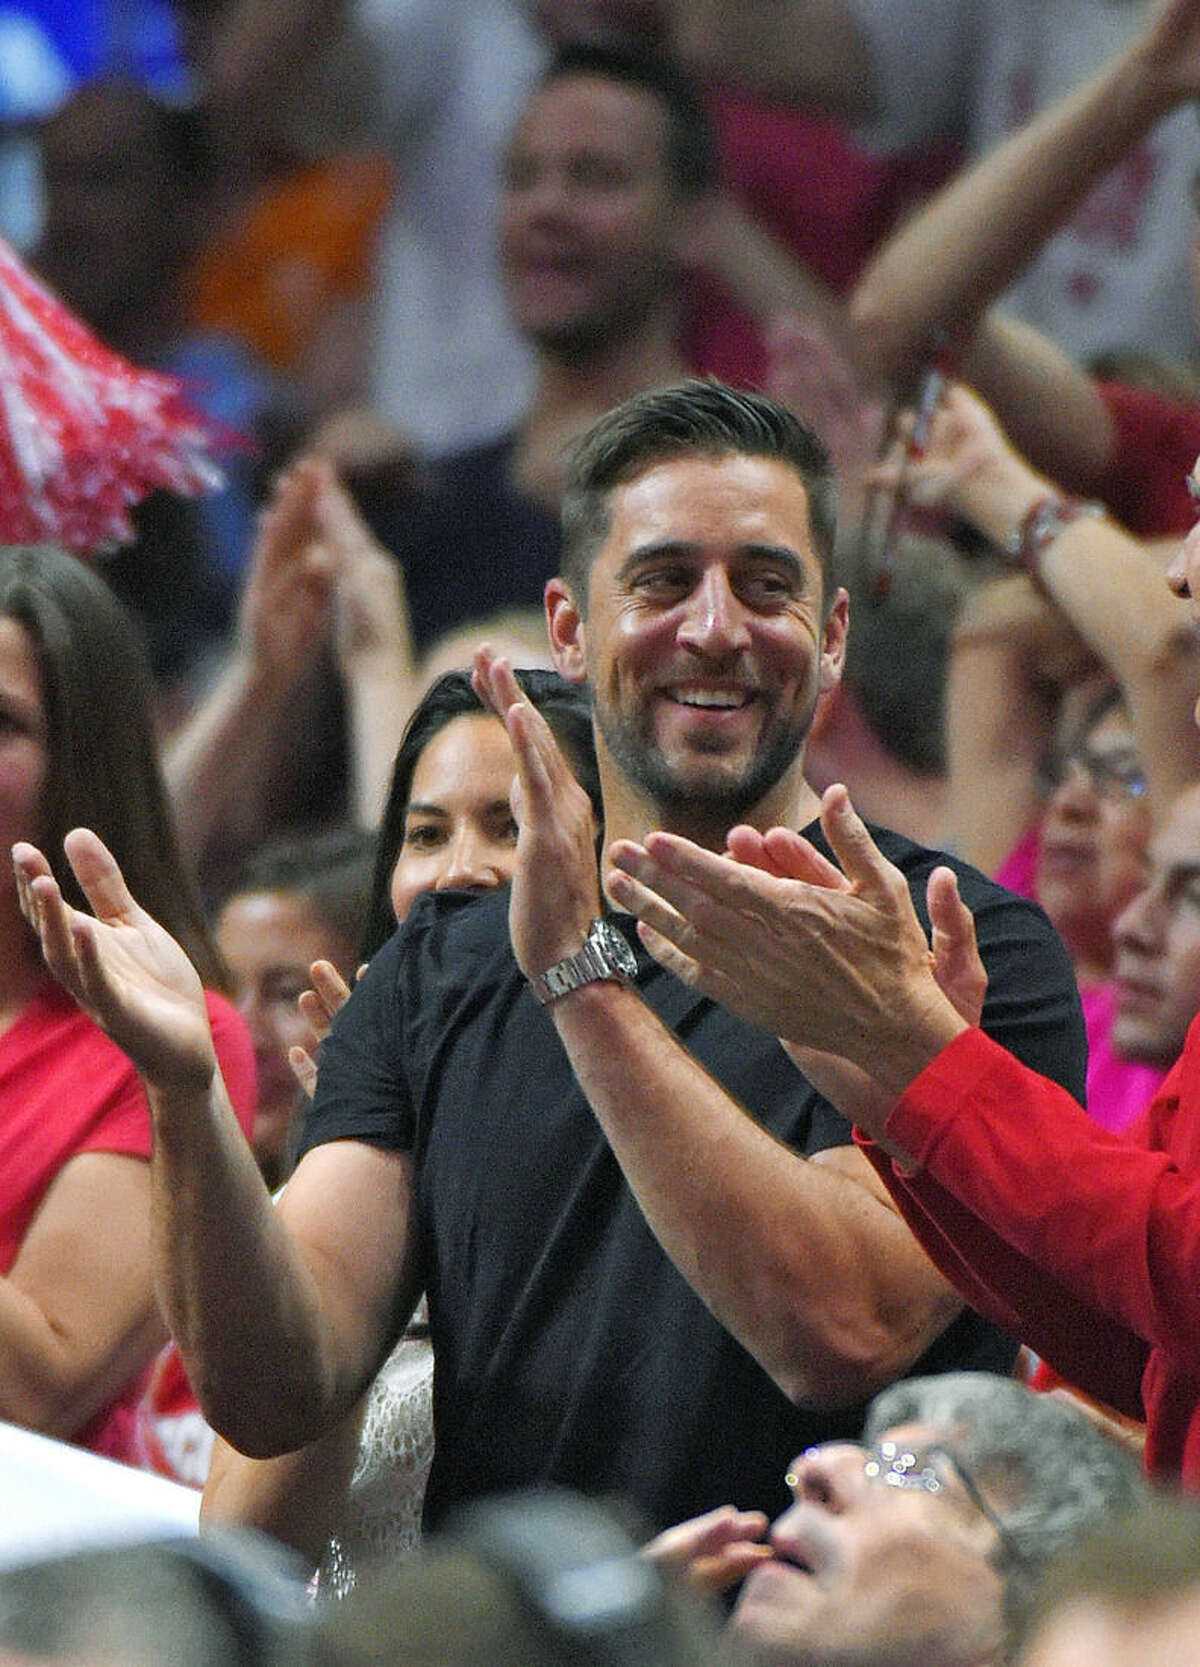 Aaron Rodgers, quarterback for the Green Bay Packers NFL football team, cheers during the second half of a college basketball regional final between Wisconsin and Arizona in the NCAA Tournament, Saturday, March 28, 2015, in Los Angeles. (AP Photo/Mark J. Terrill)